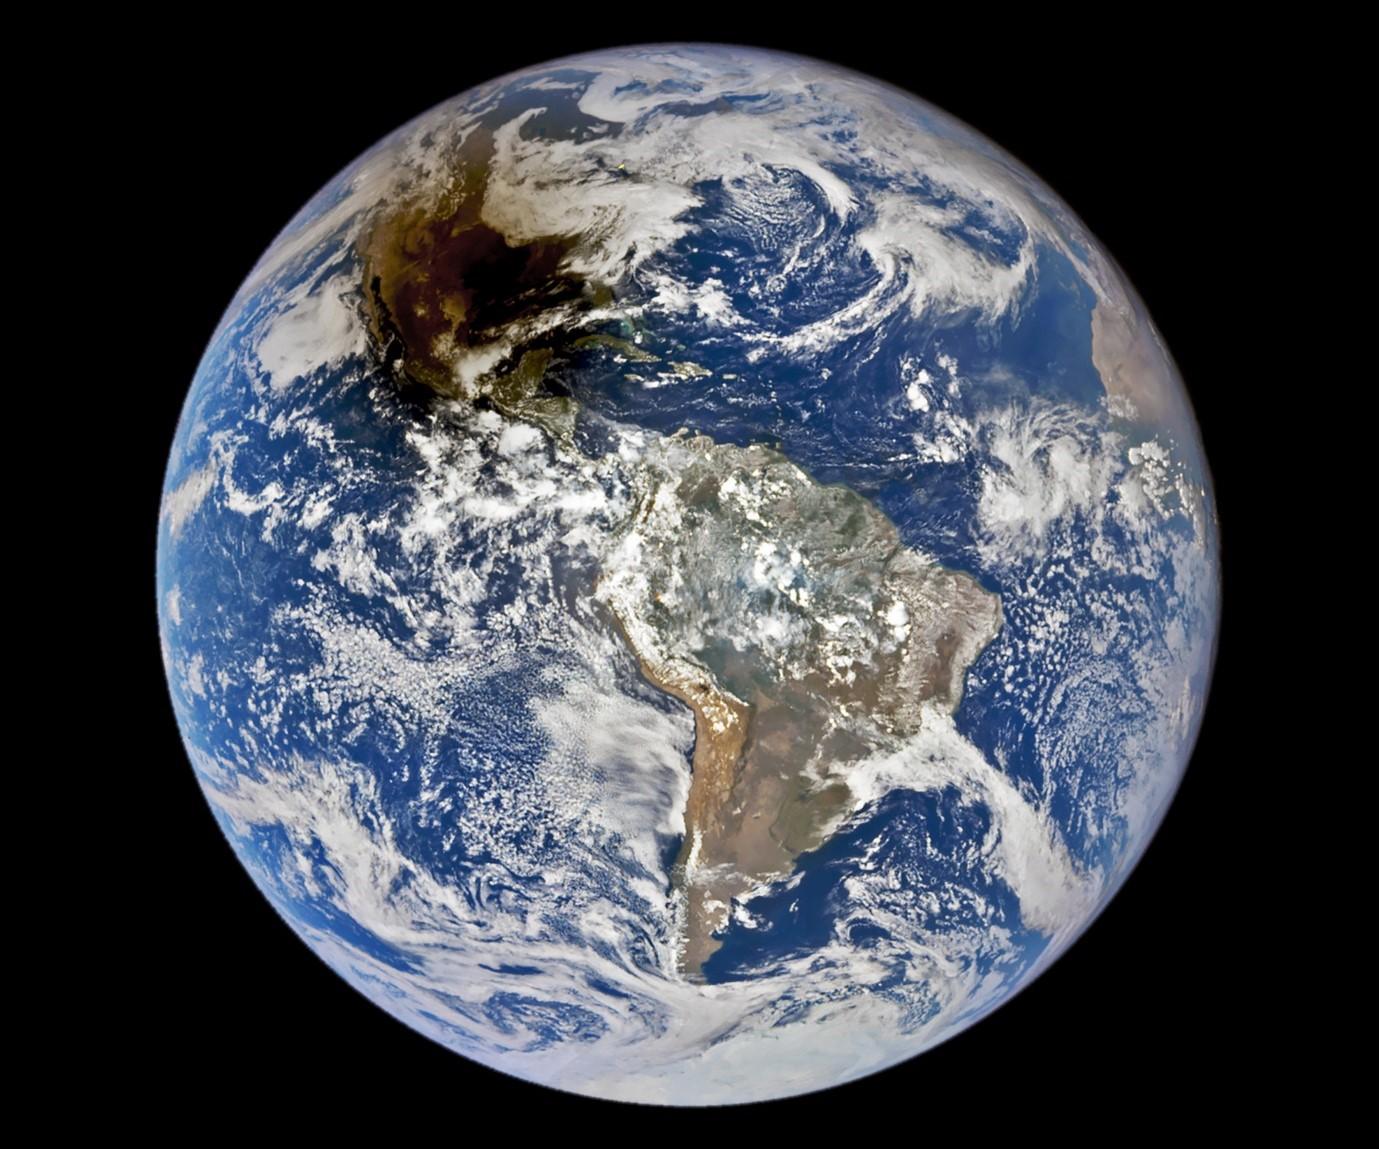 A view of Earth taken from Space with the Moon’s shadow cast upon it.